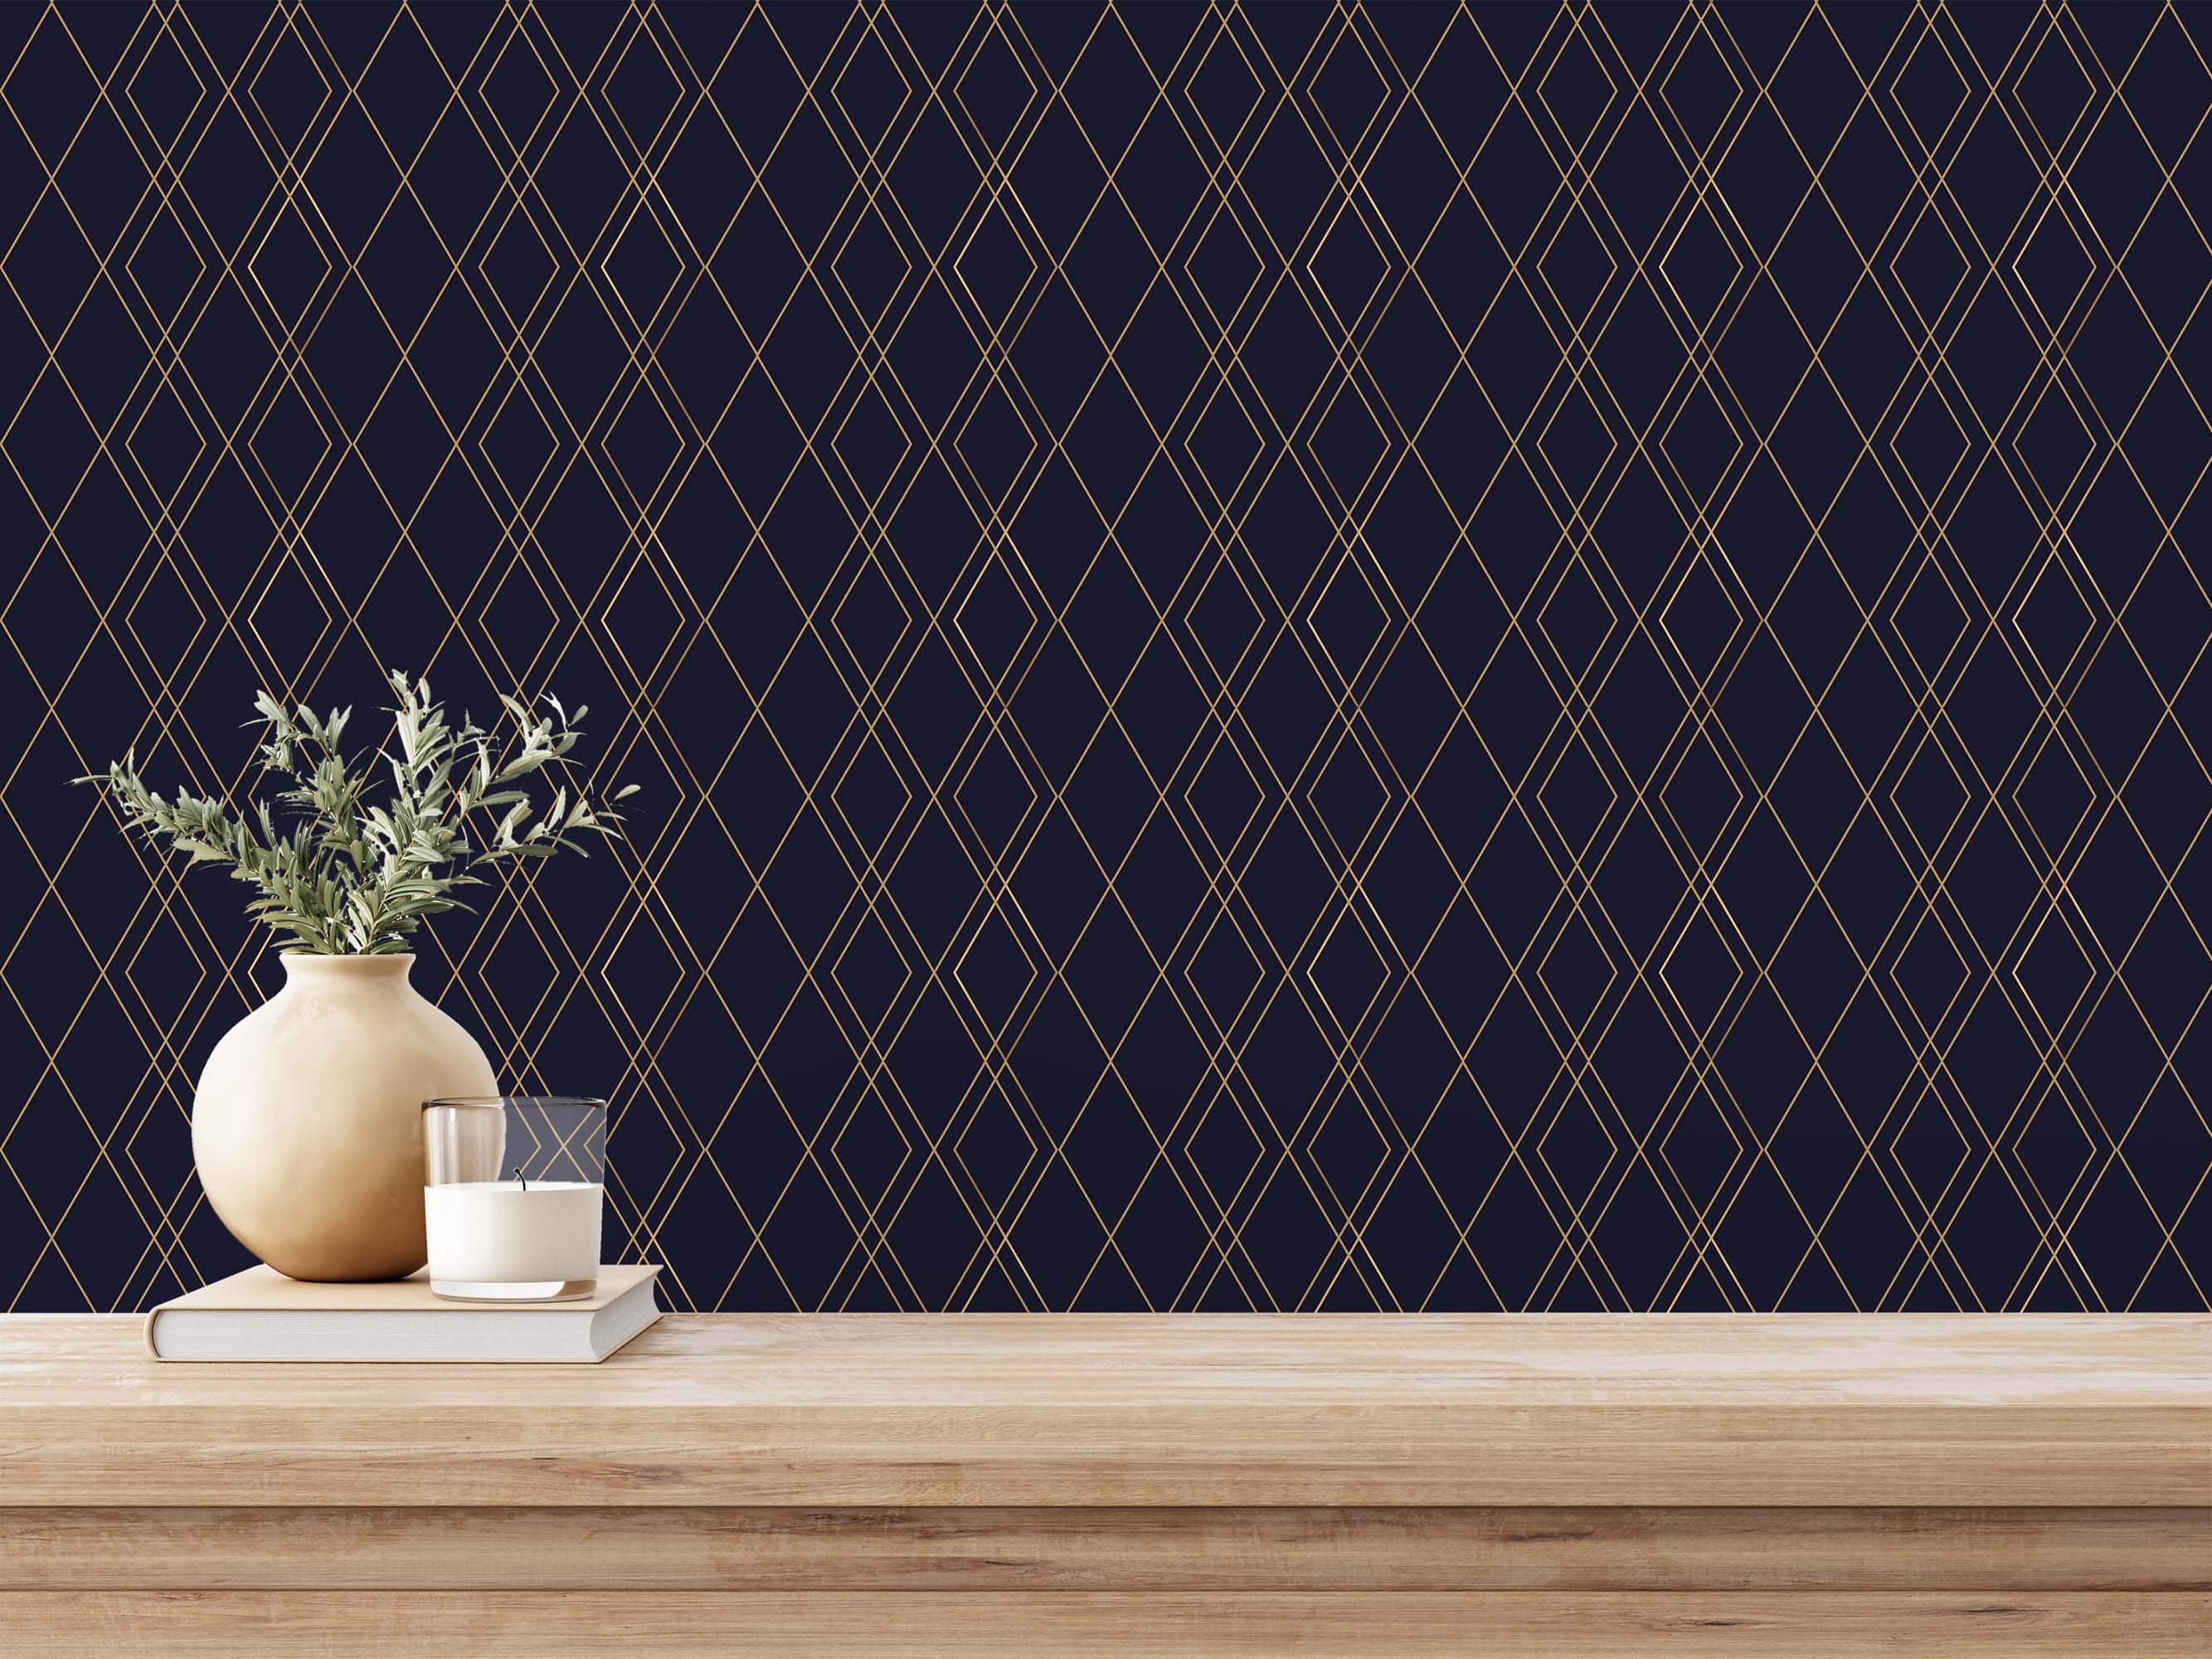 Luxury geometric wallpaper - Peel and Stick or Non-Pasted